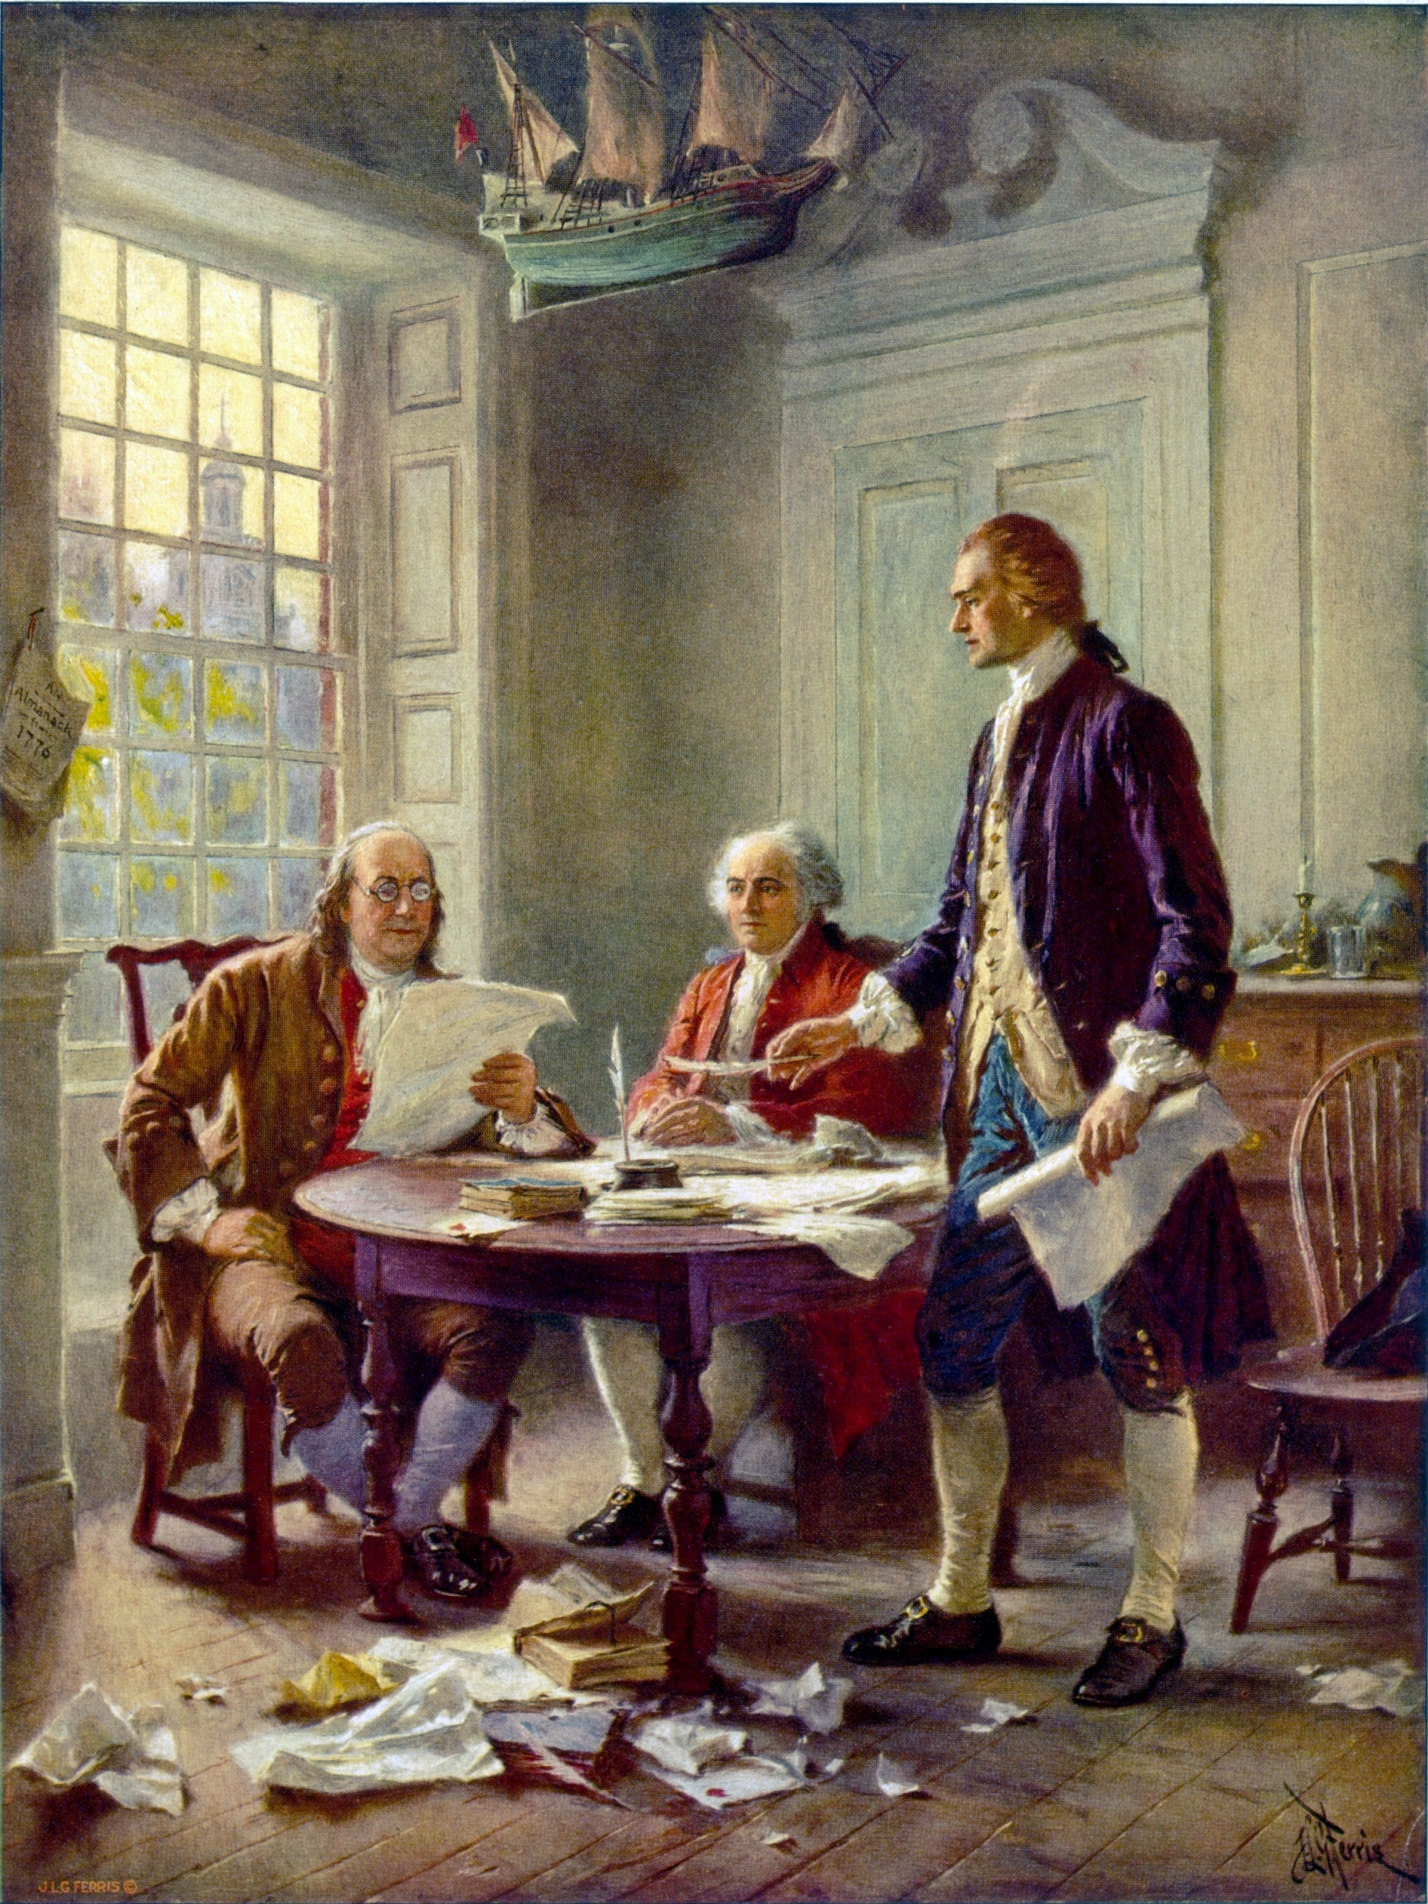 Writing the Declaration of Independence. Painting by Jean Leon Gerome Ferris (1863 - 1930). Public domain photo.